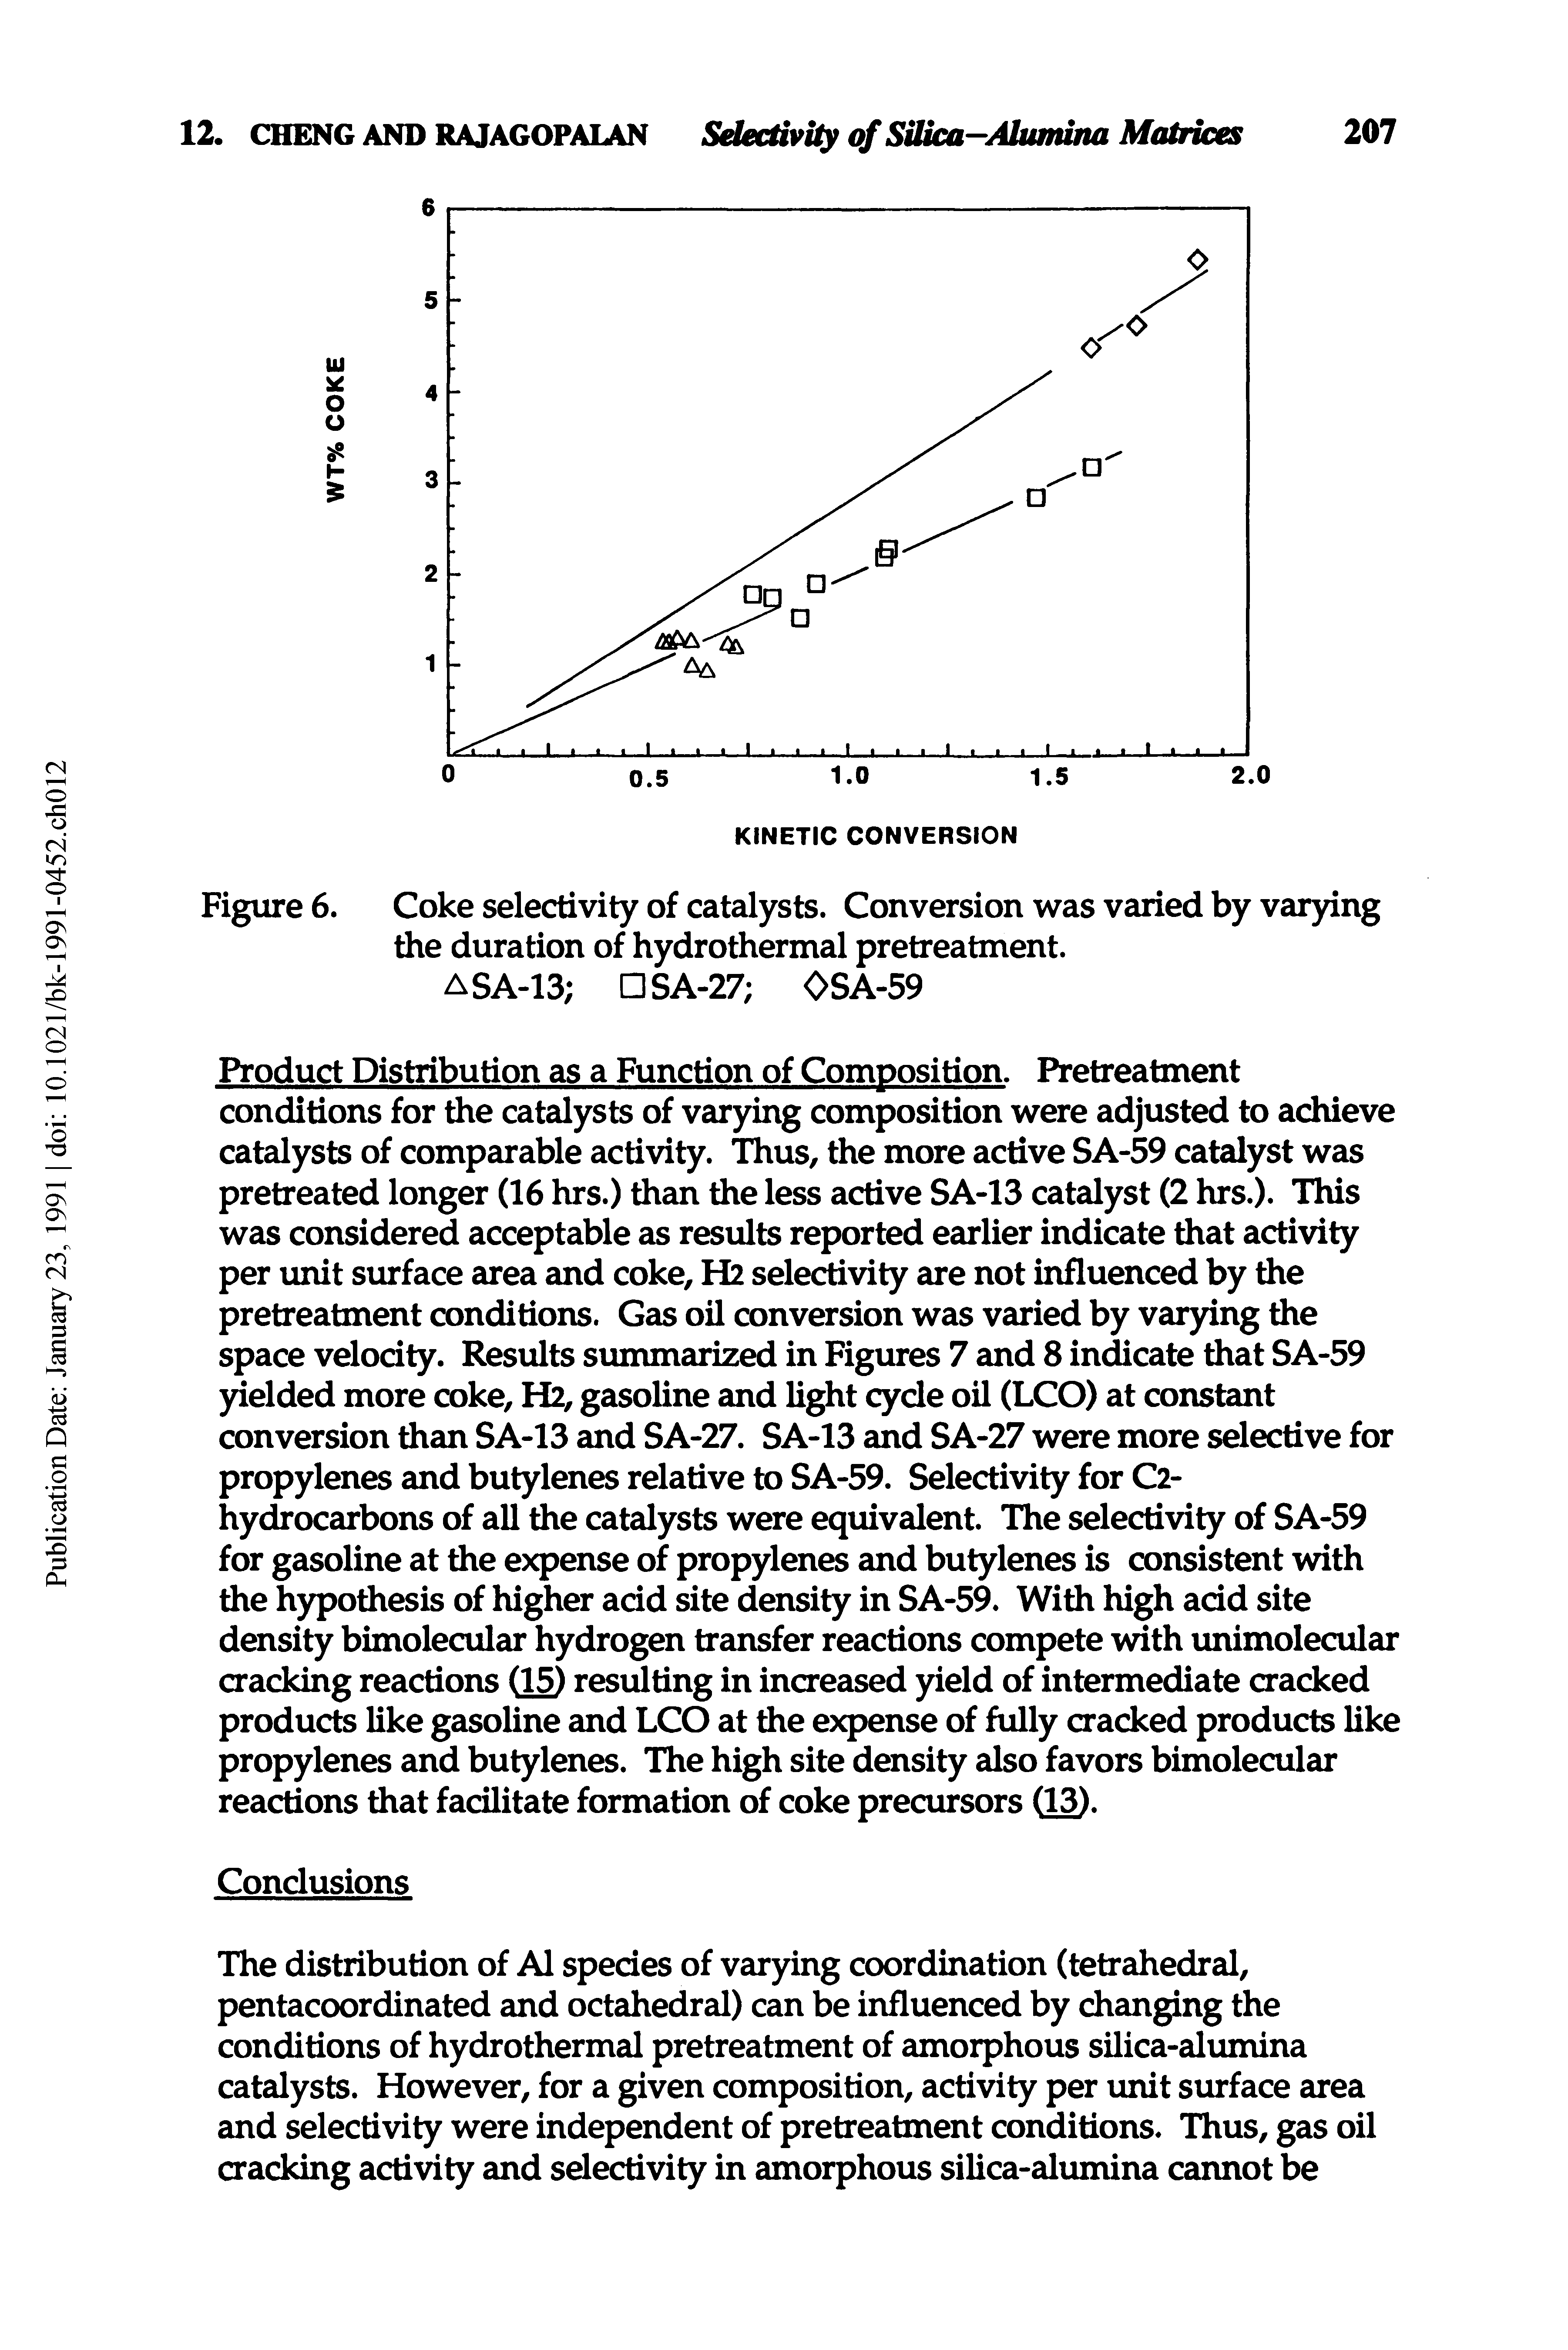 Figure 6. Coke selectivity of catalysts. Conversion was varied by varying the duration of hydrothermal pretreatment.